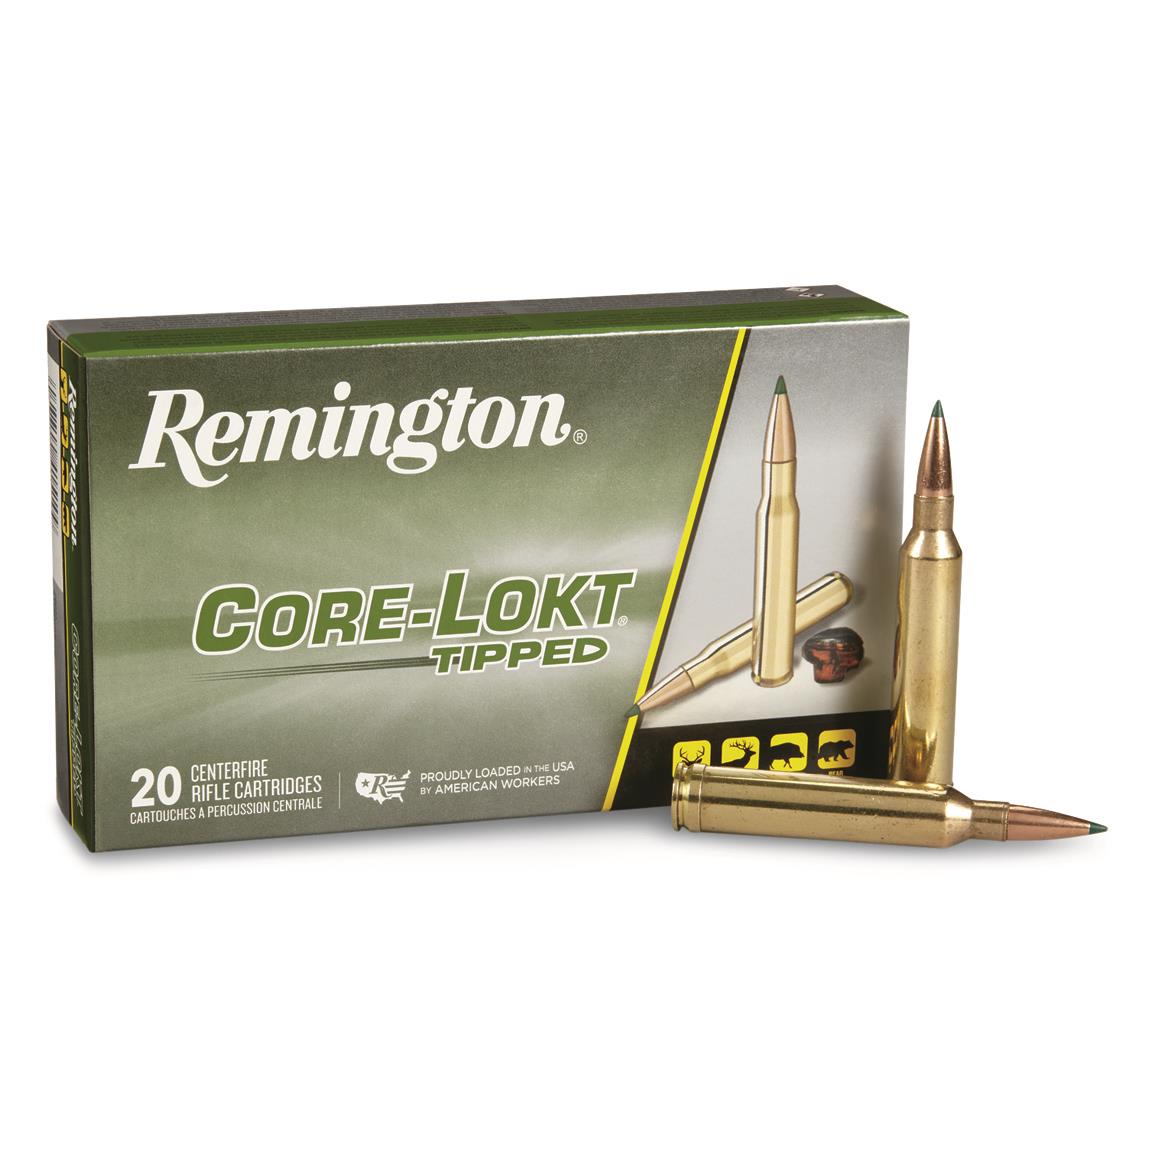 Remington Core-Lokt Tipped, 7mm Rem. Mag., Polymer Tip, 150 Grain, 20 Rounds